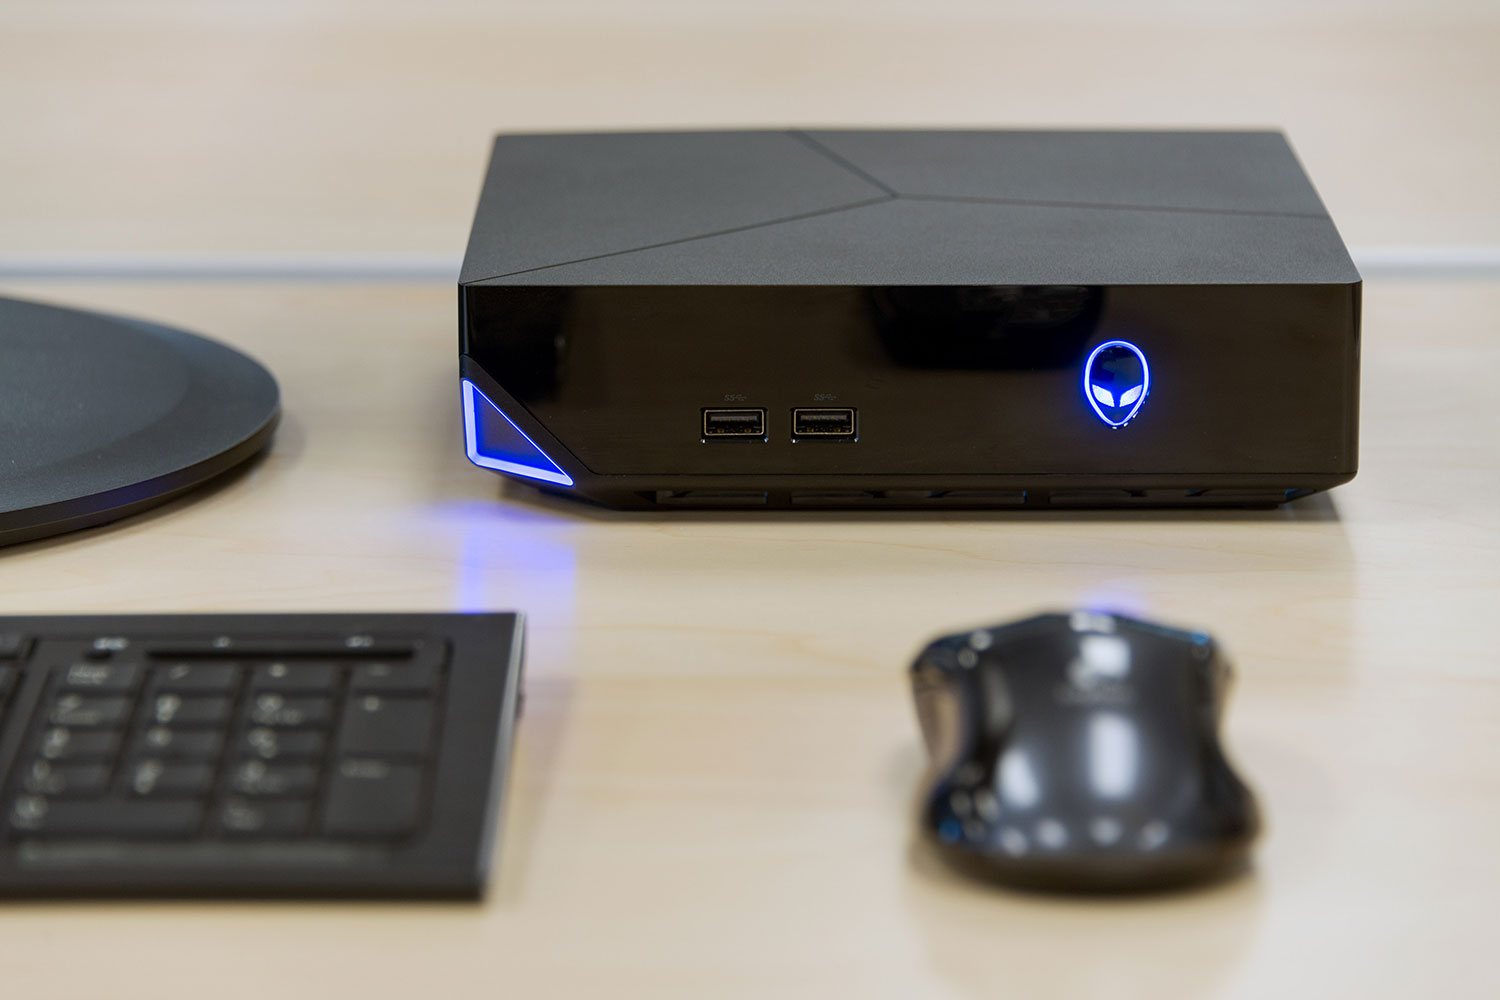 Alienware just invalidated its own high-end esports monitor